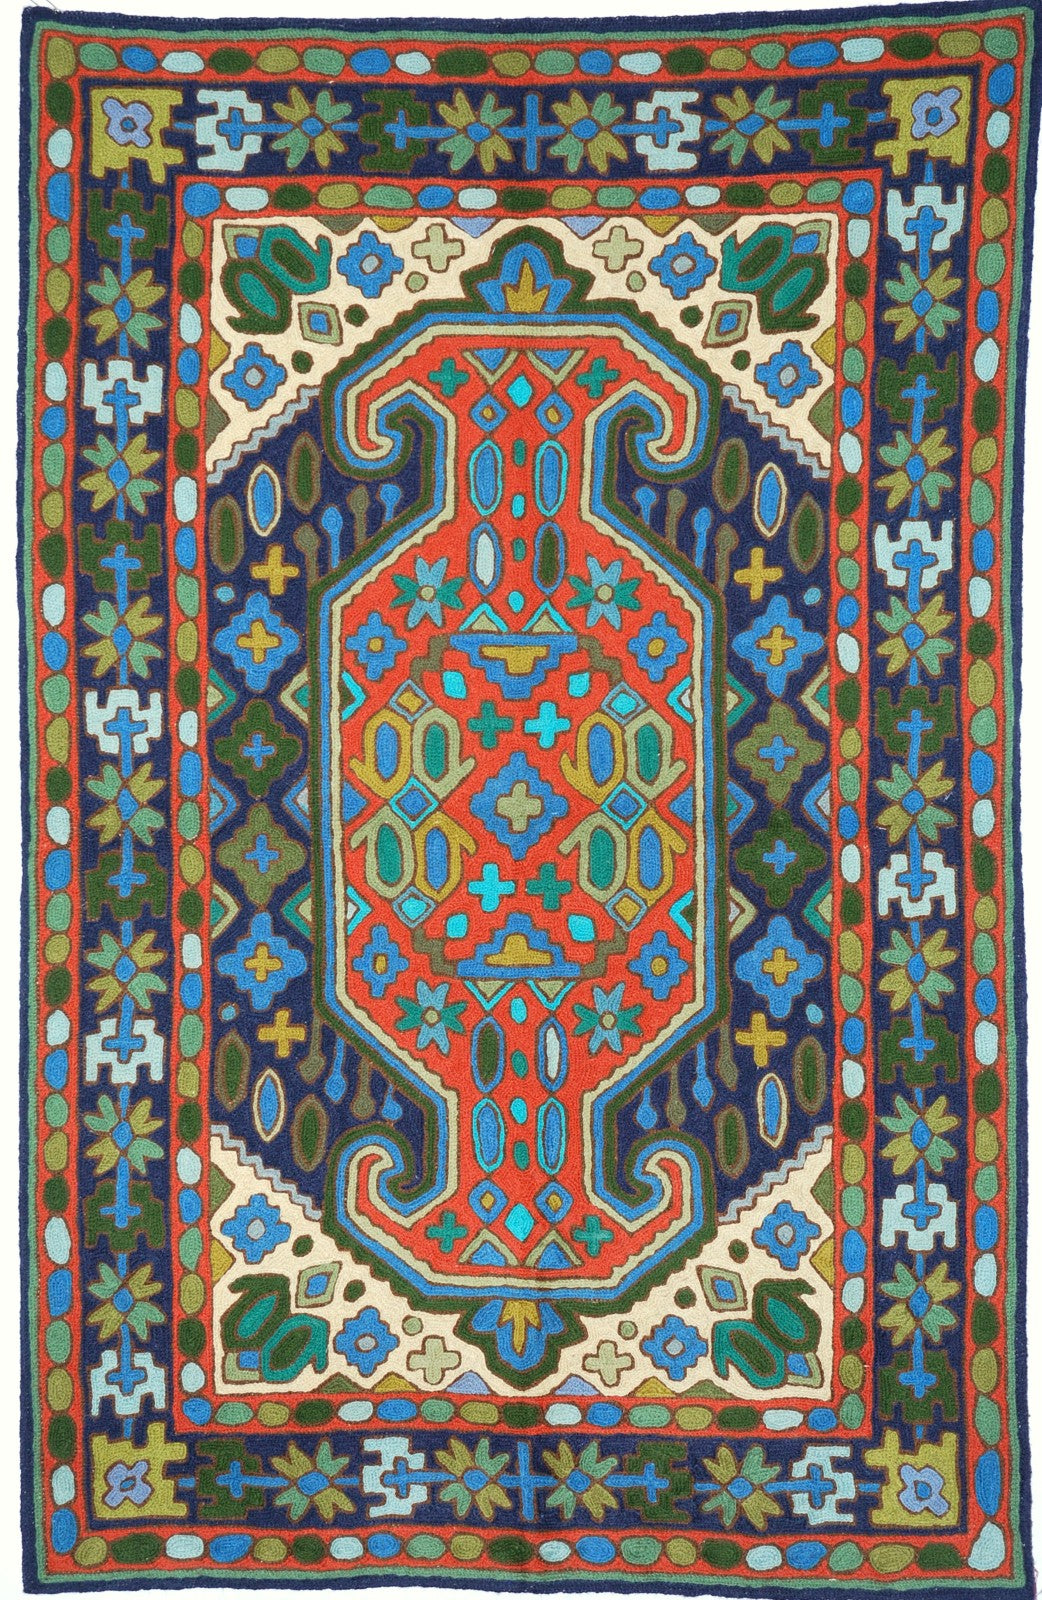 ChainStitch Tapestry Kilim Woolen Area Rug, Multicolor Embroidery 2.5x4 feet #CWR10014